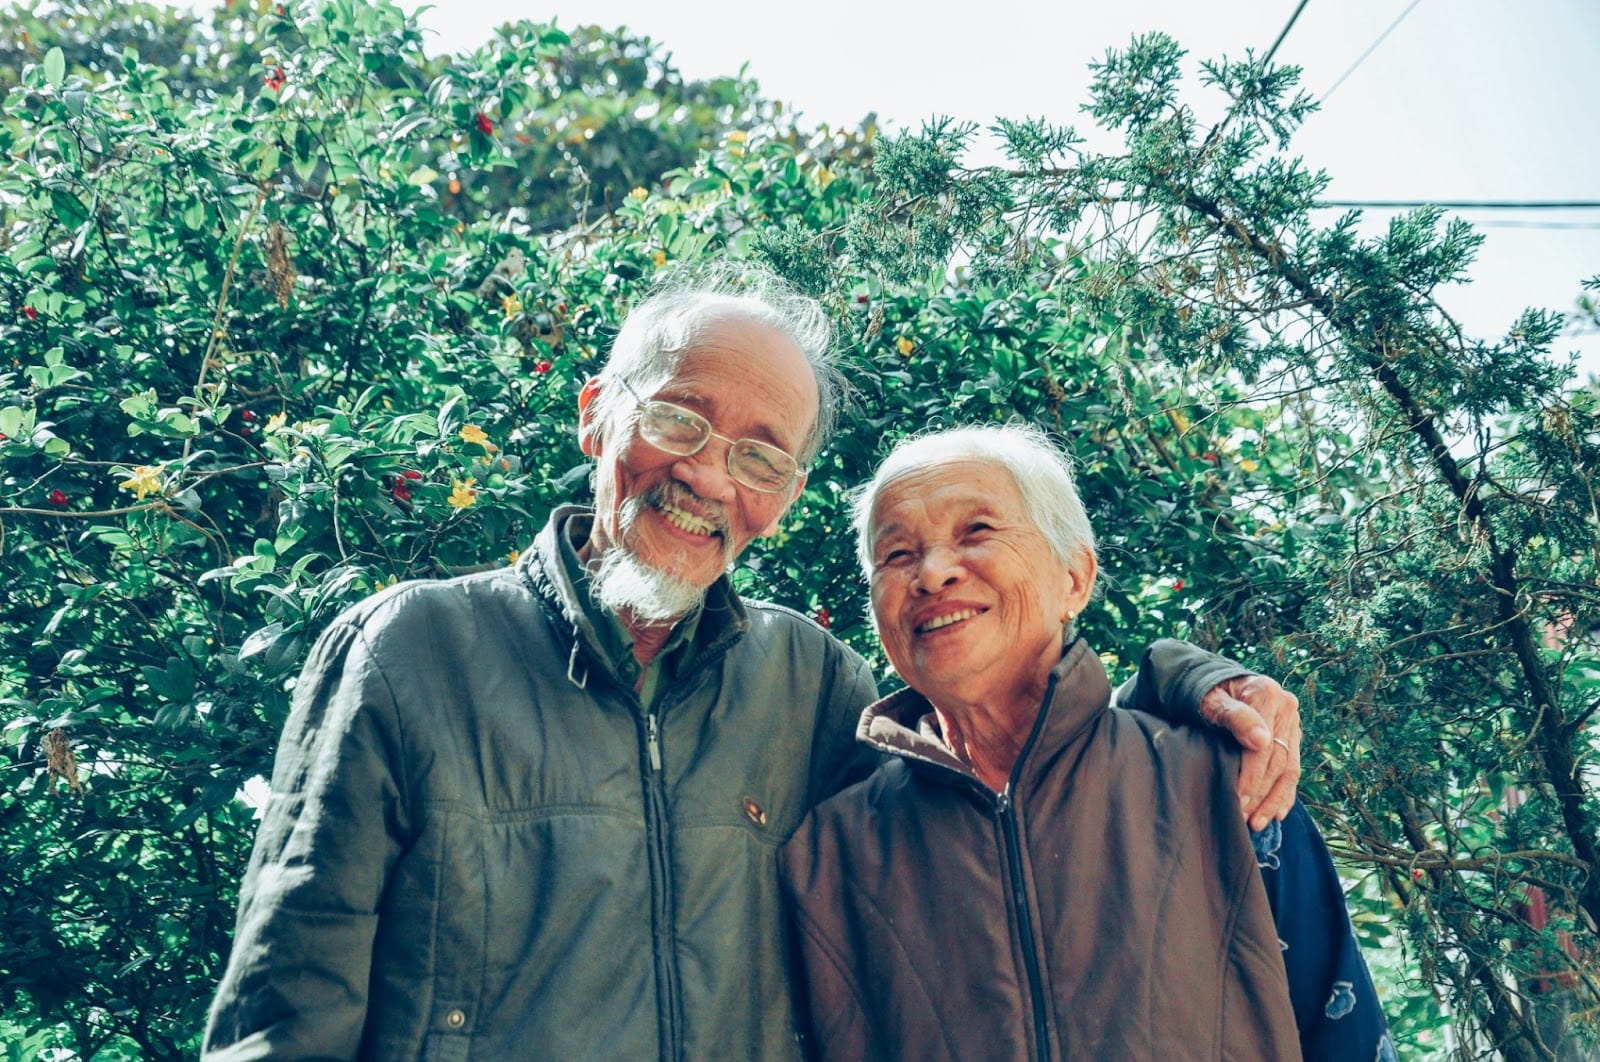 An elderly couple smiling and laughing with their arms around each other